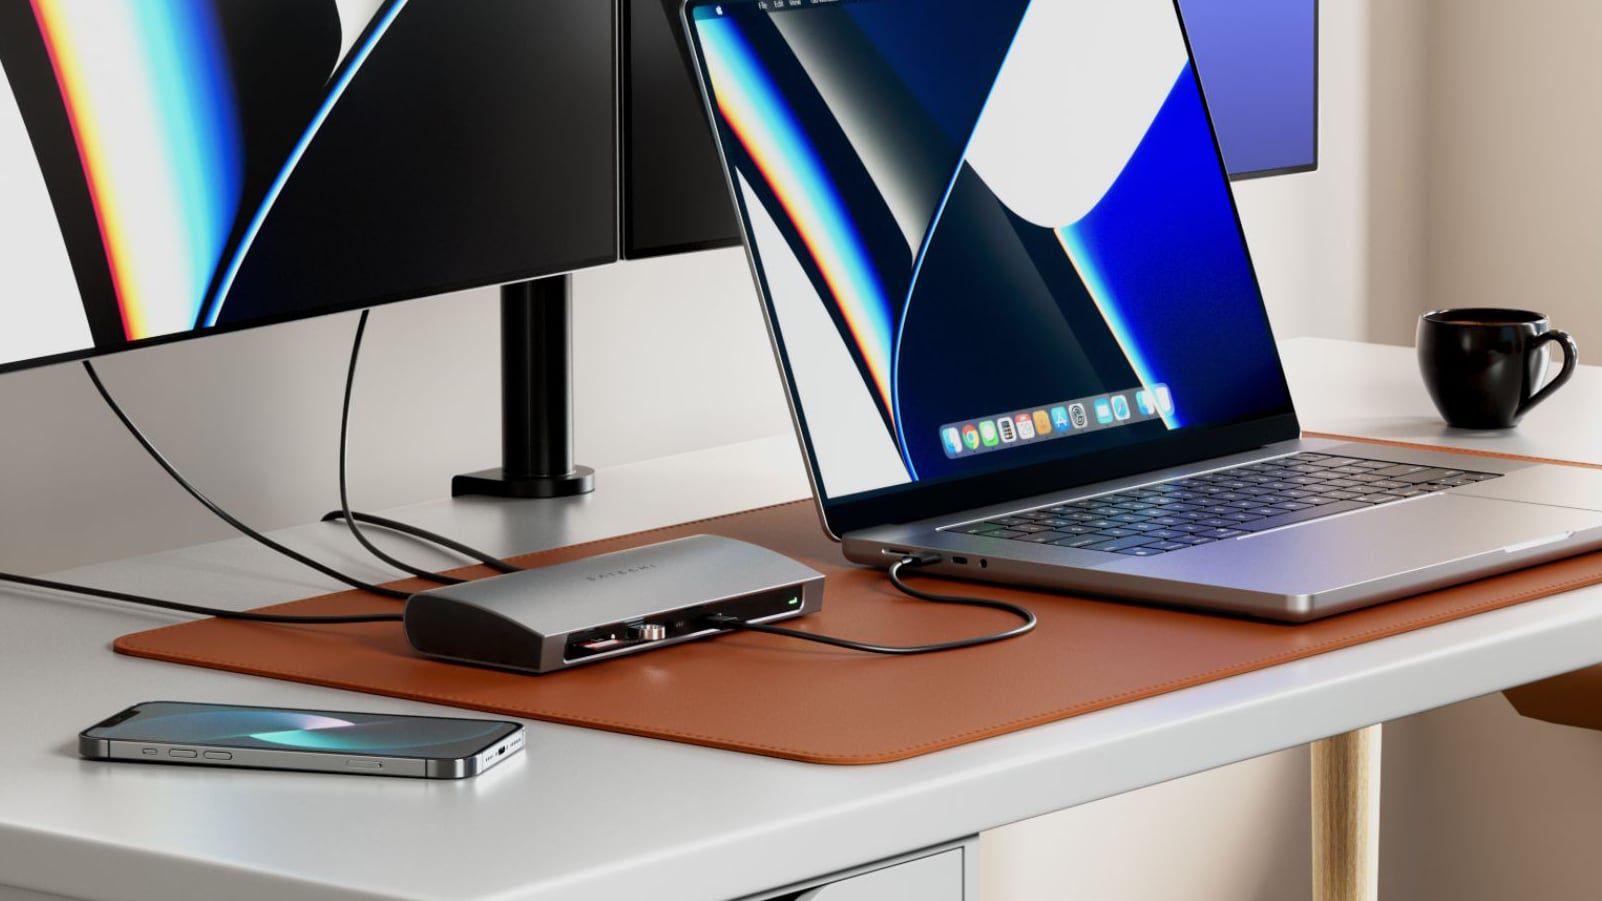 Satechi Launches Thunderbolt 4 Dock and USB-C Adapters for Apple Silicon Macs